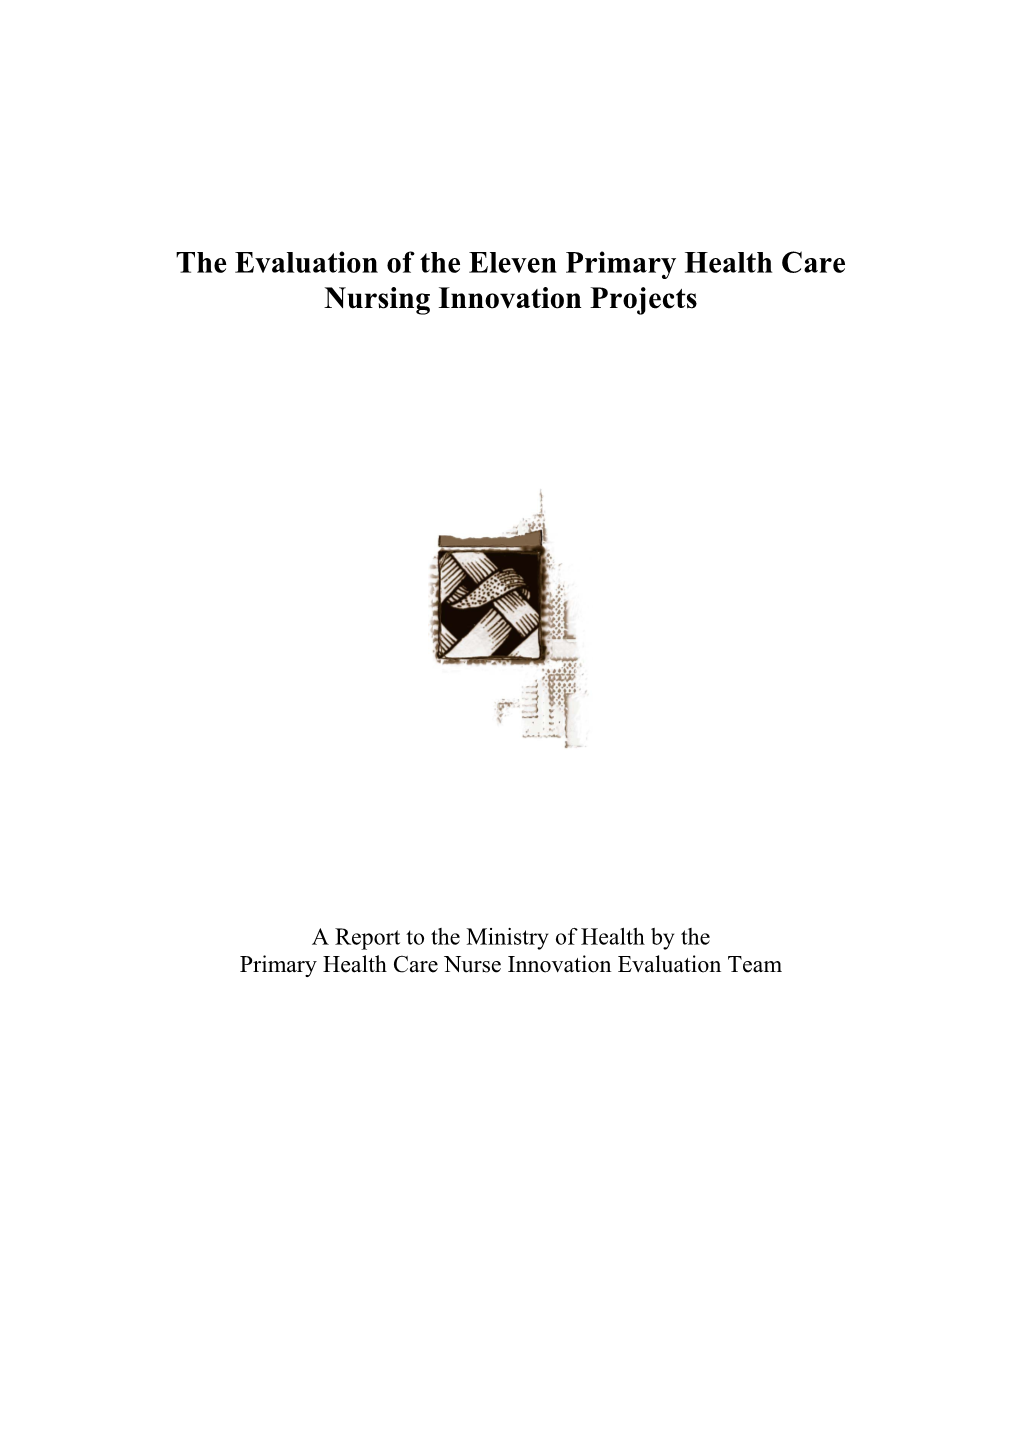 The Evaluation of the Eleven Primary Health Care Nursing Innovation Projects